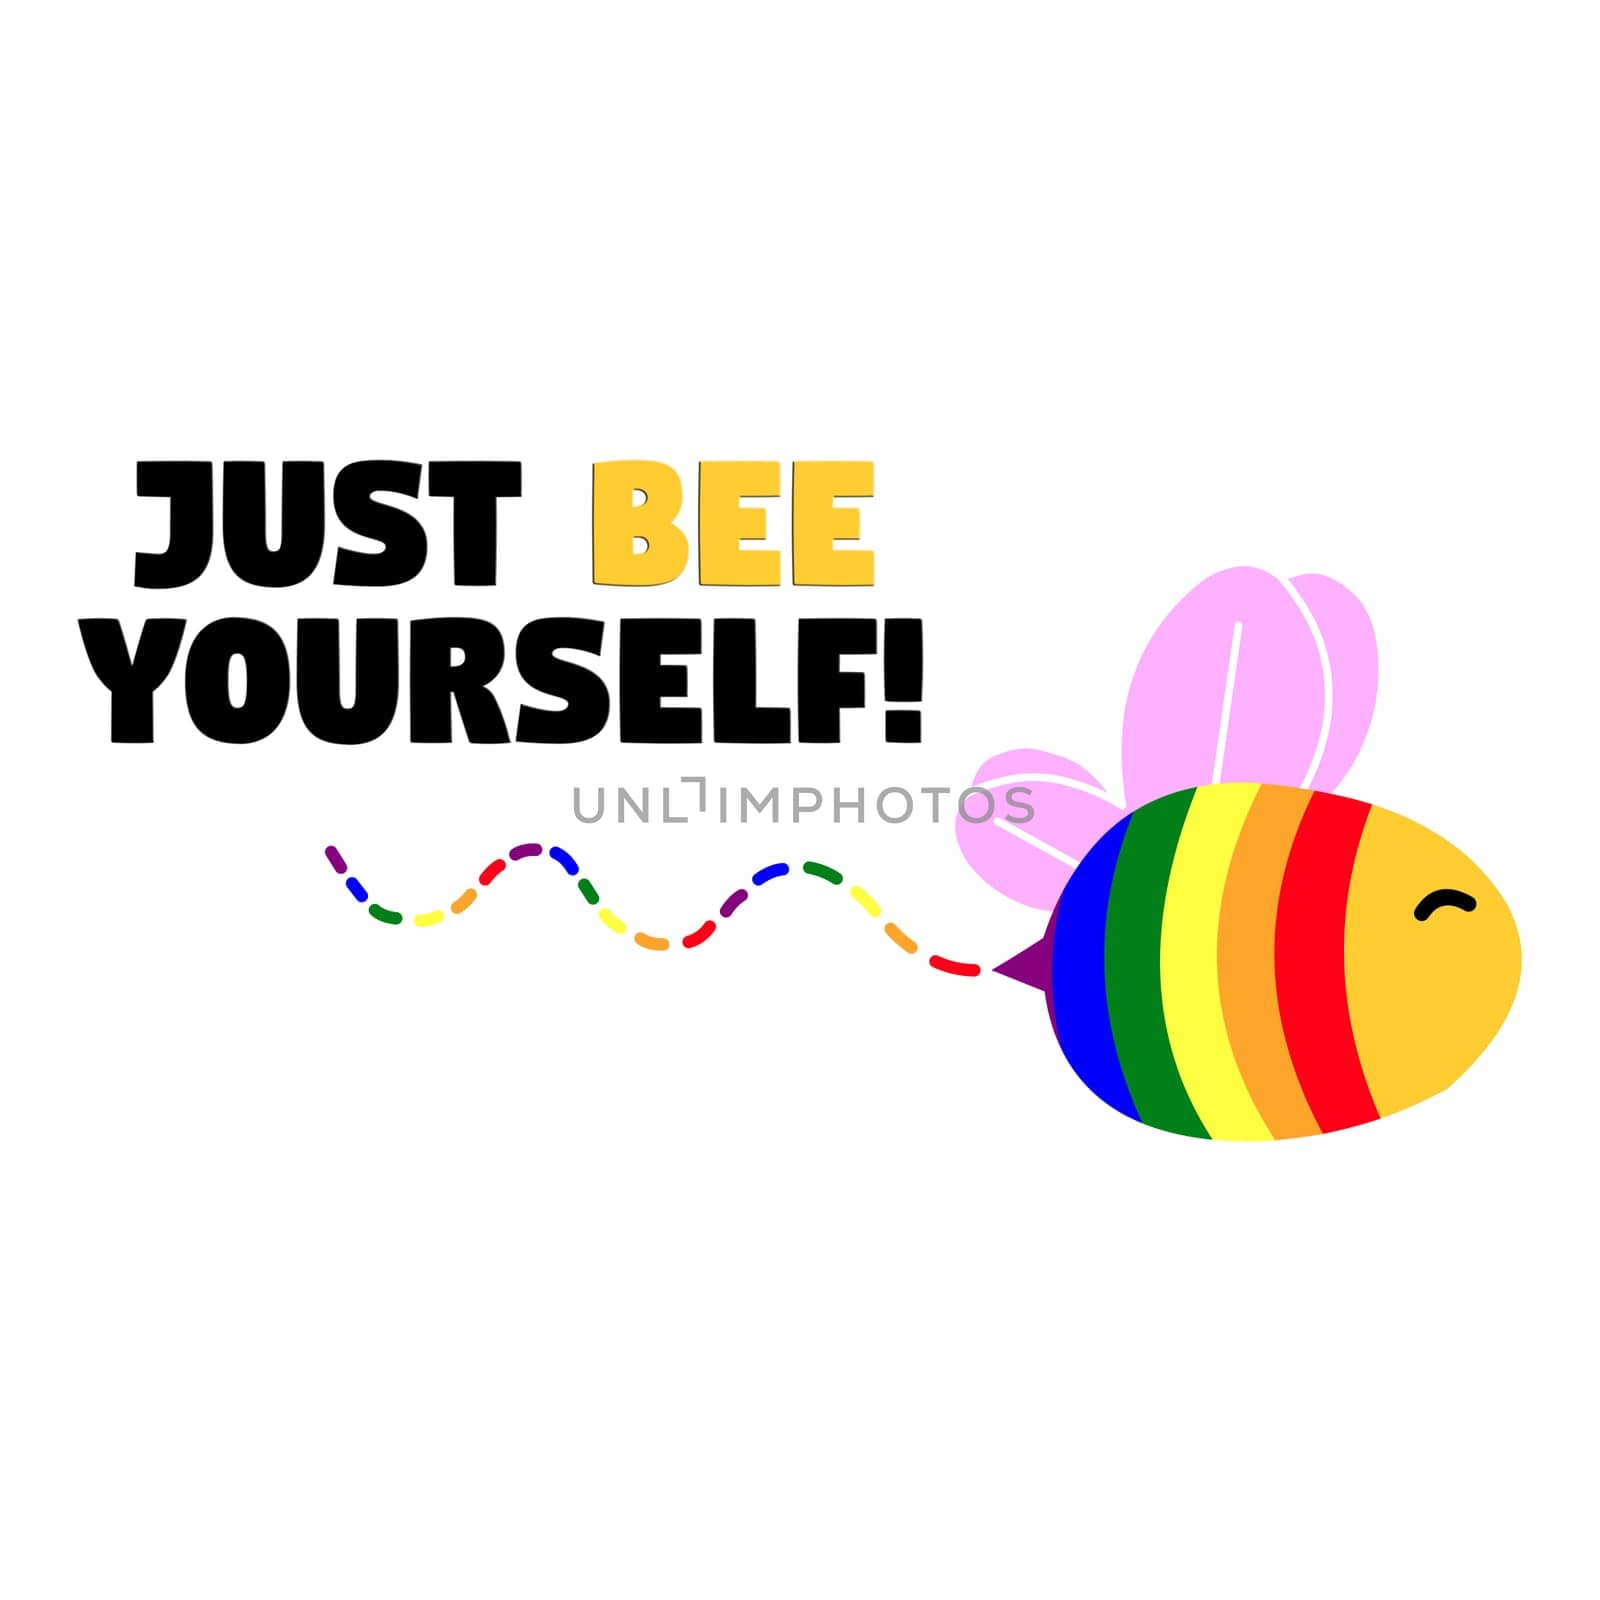 A colorful gay pride bee with the text "Just bee yourself".